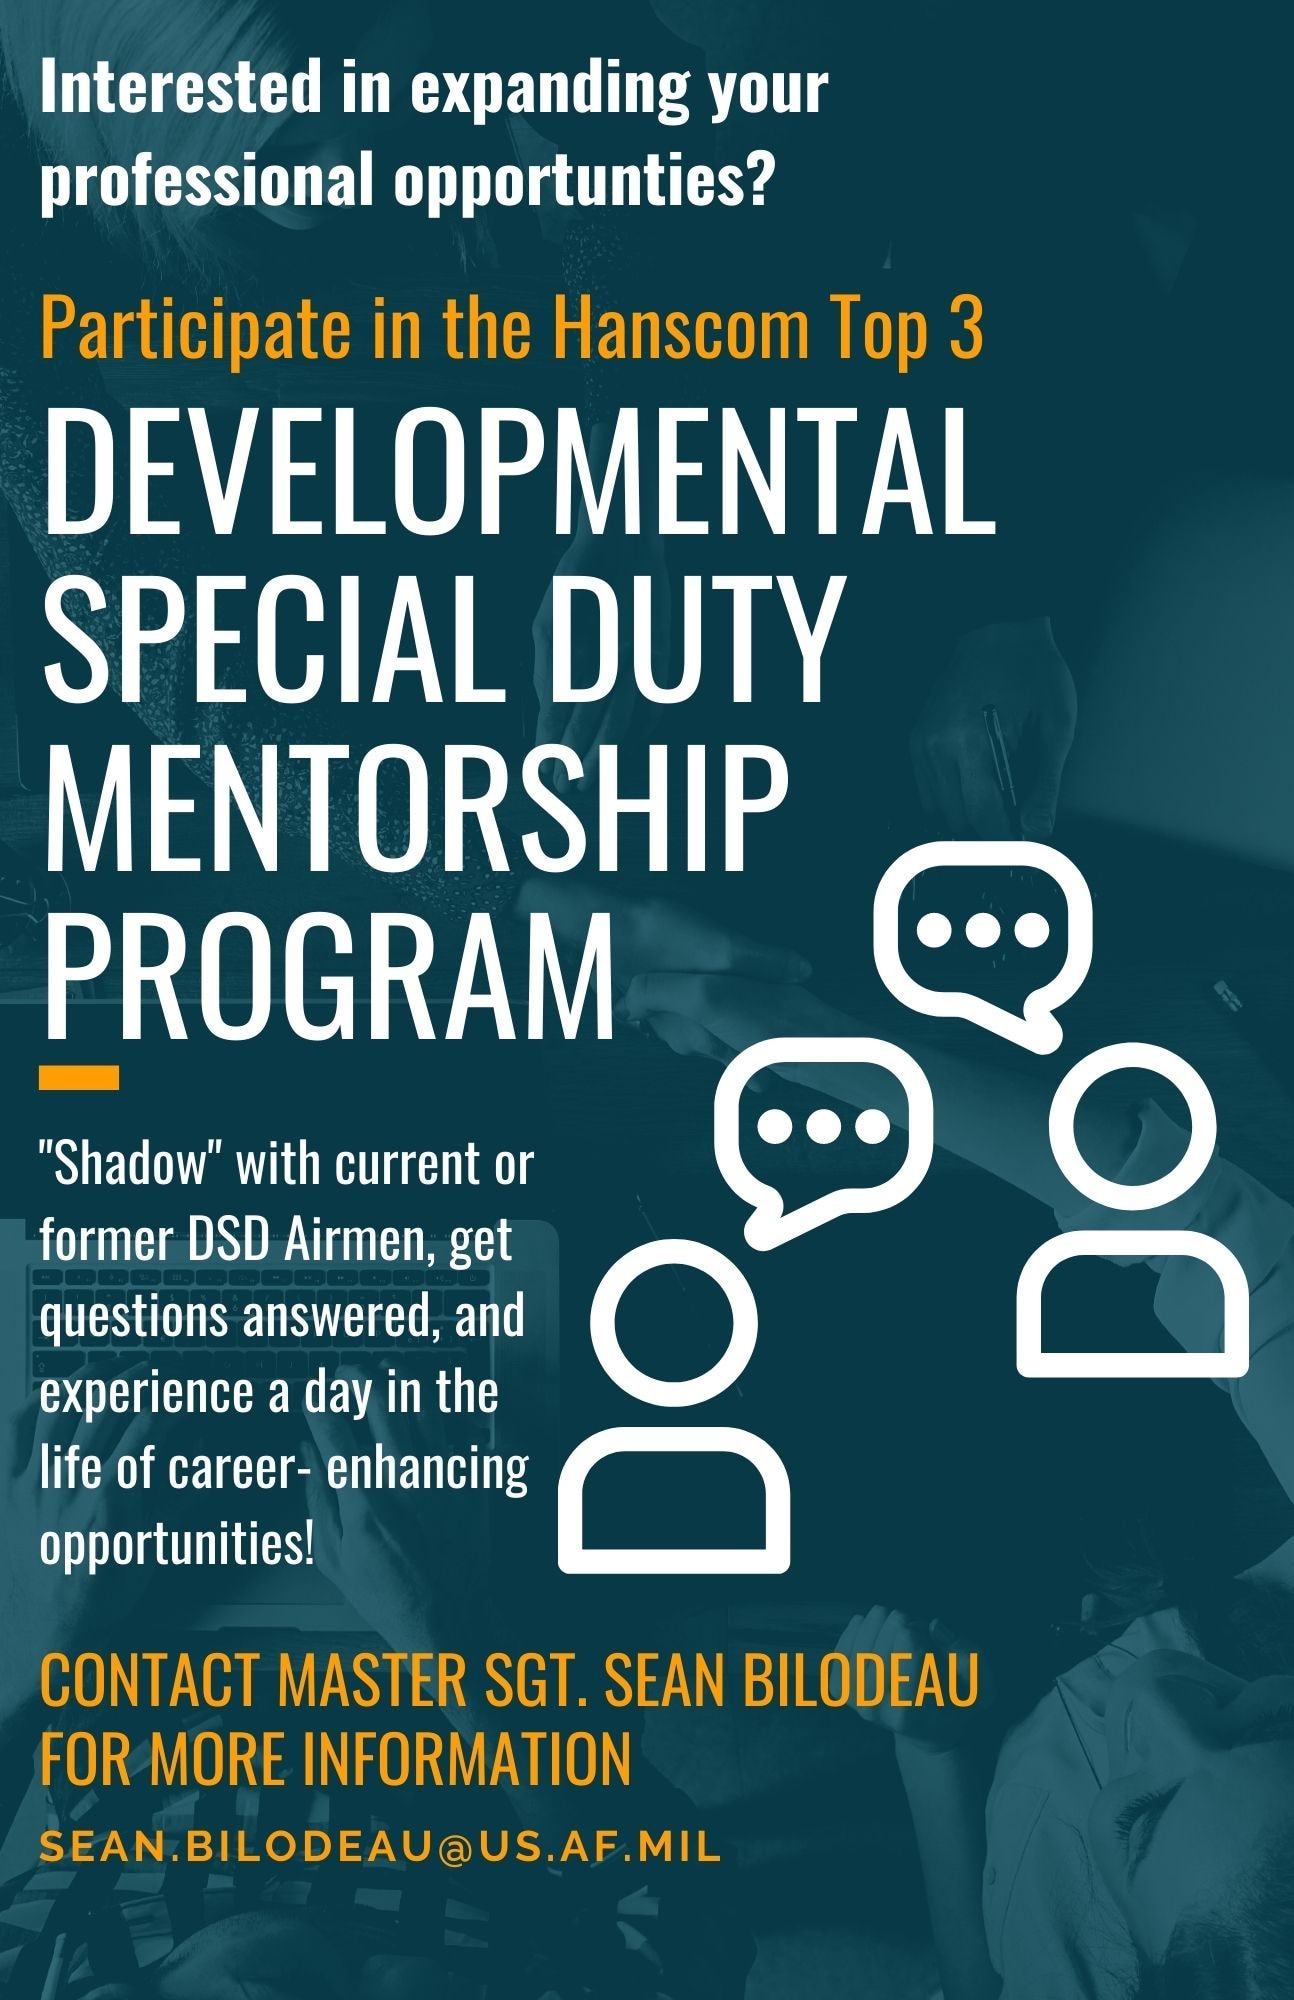 The Hanscom Top 3 Council has established a mentorship program for Airmen at Hanscom Air Force Base, Mass., interested in developmental special duties. (U.S. Air Force graphic by Lauren Russell)